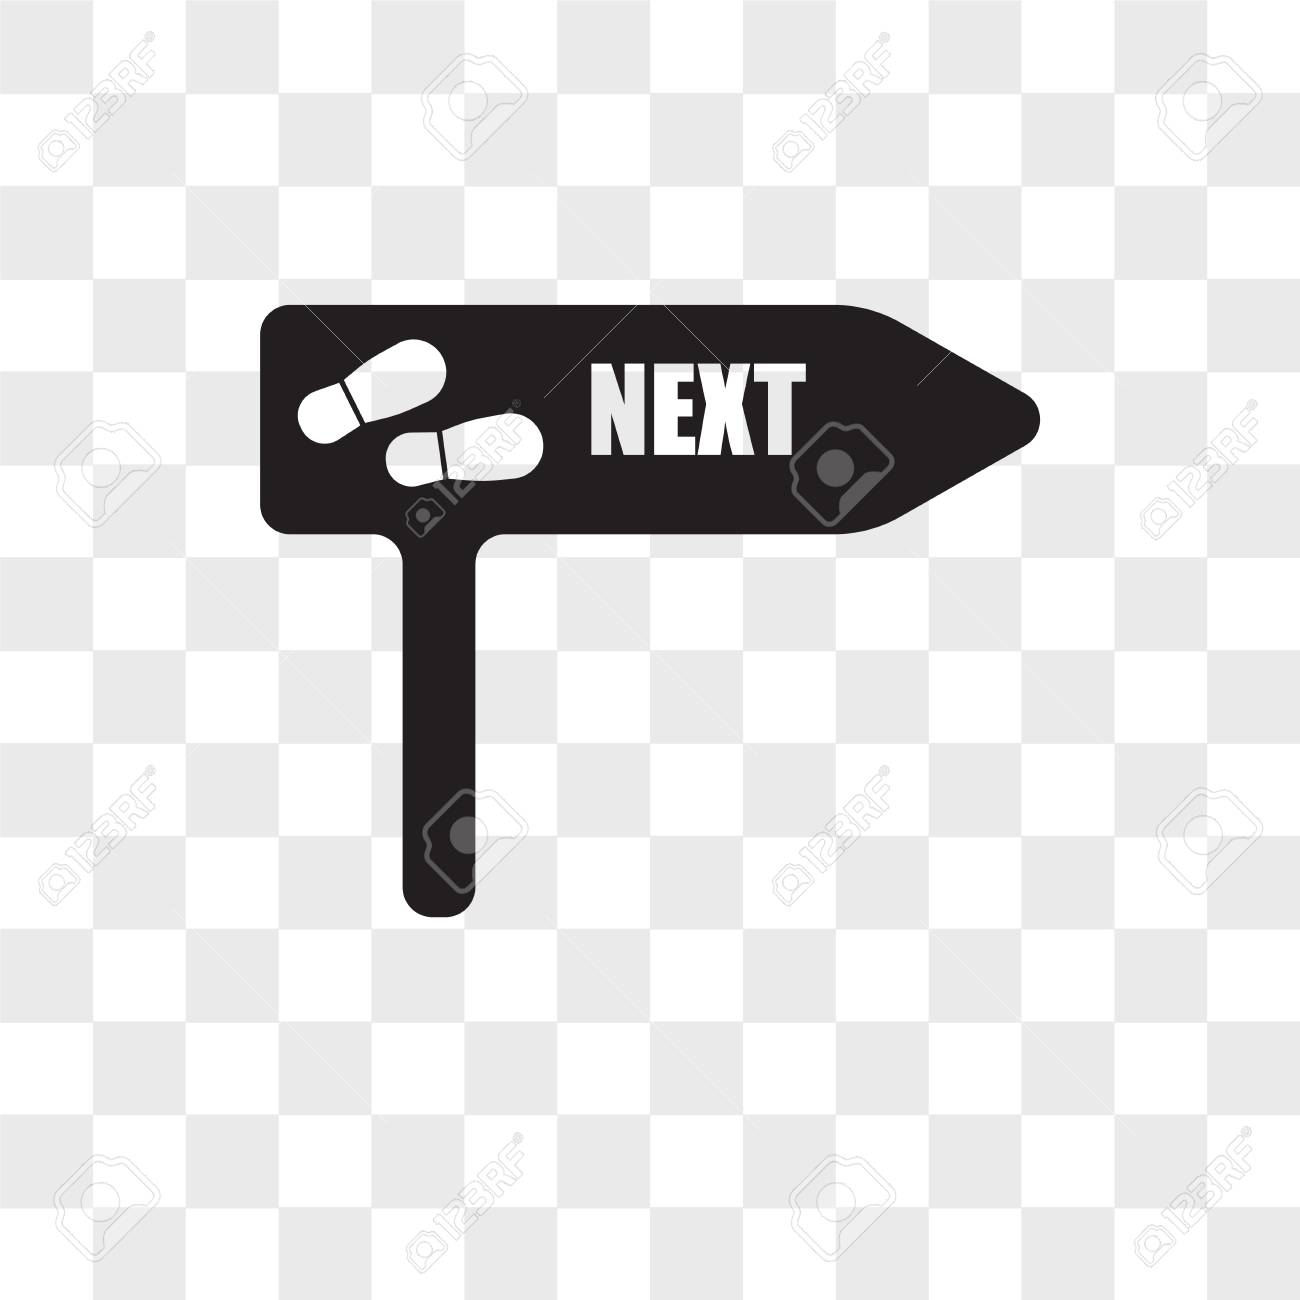 Next Steps Vector Icon Isolated On Transparent Background